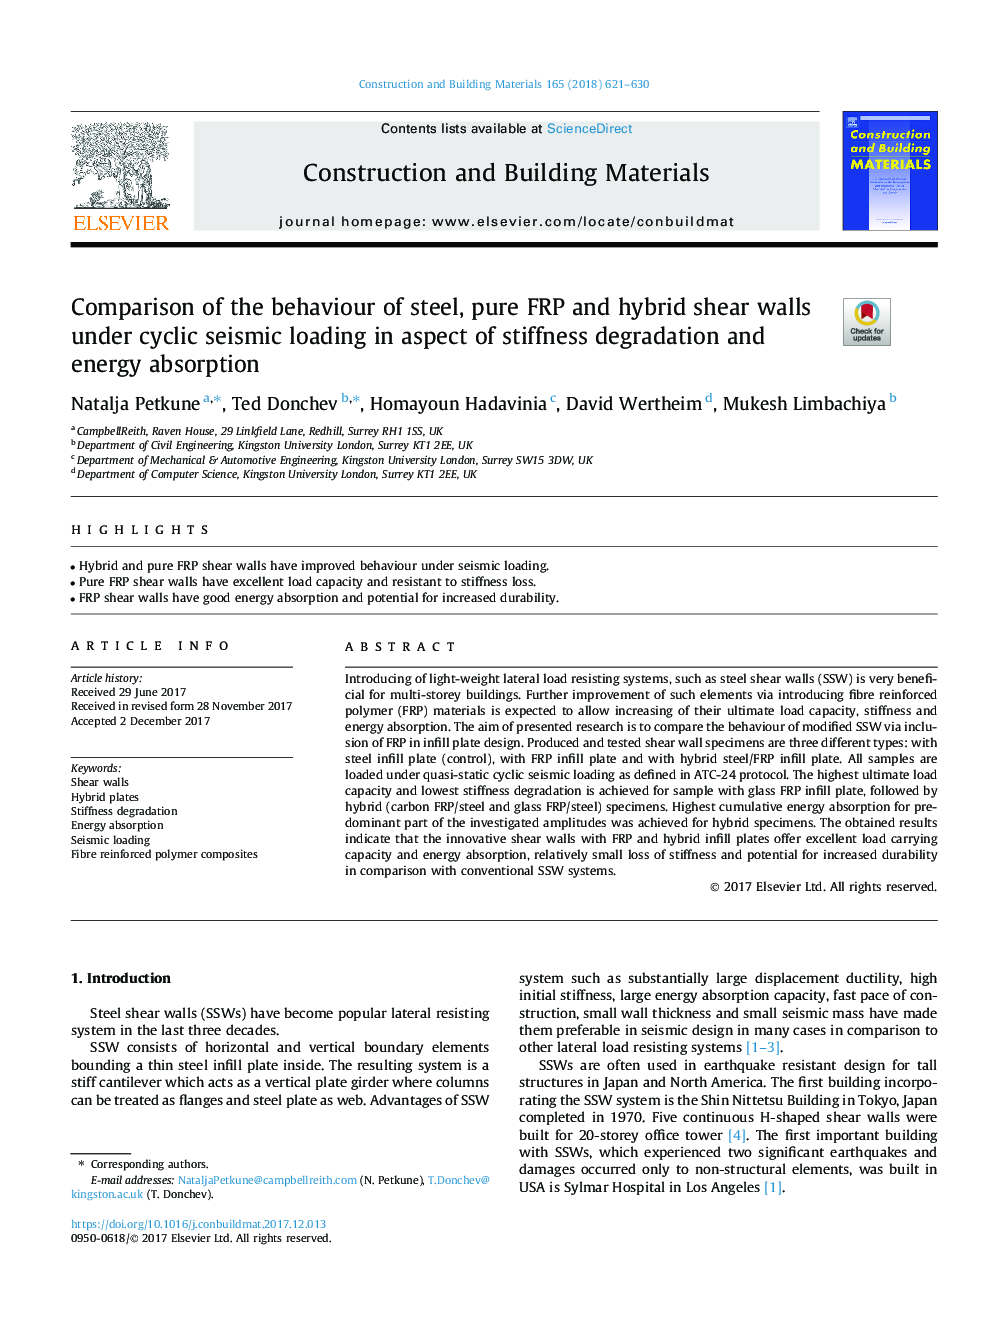 Comparison of the behaviour of steel, pure FRP and hybrid shear walls under cyclic seismic loading in aspect of stiffness degradation and energy absorption